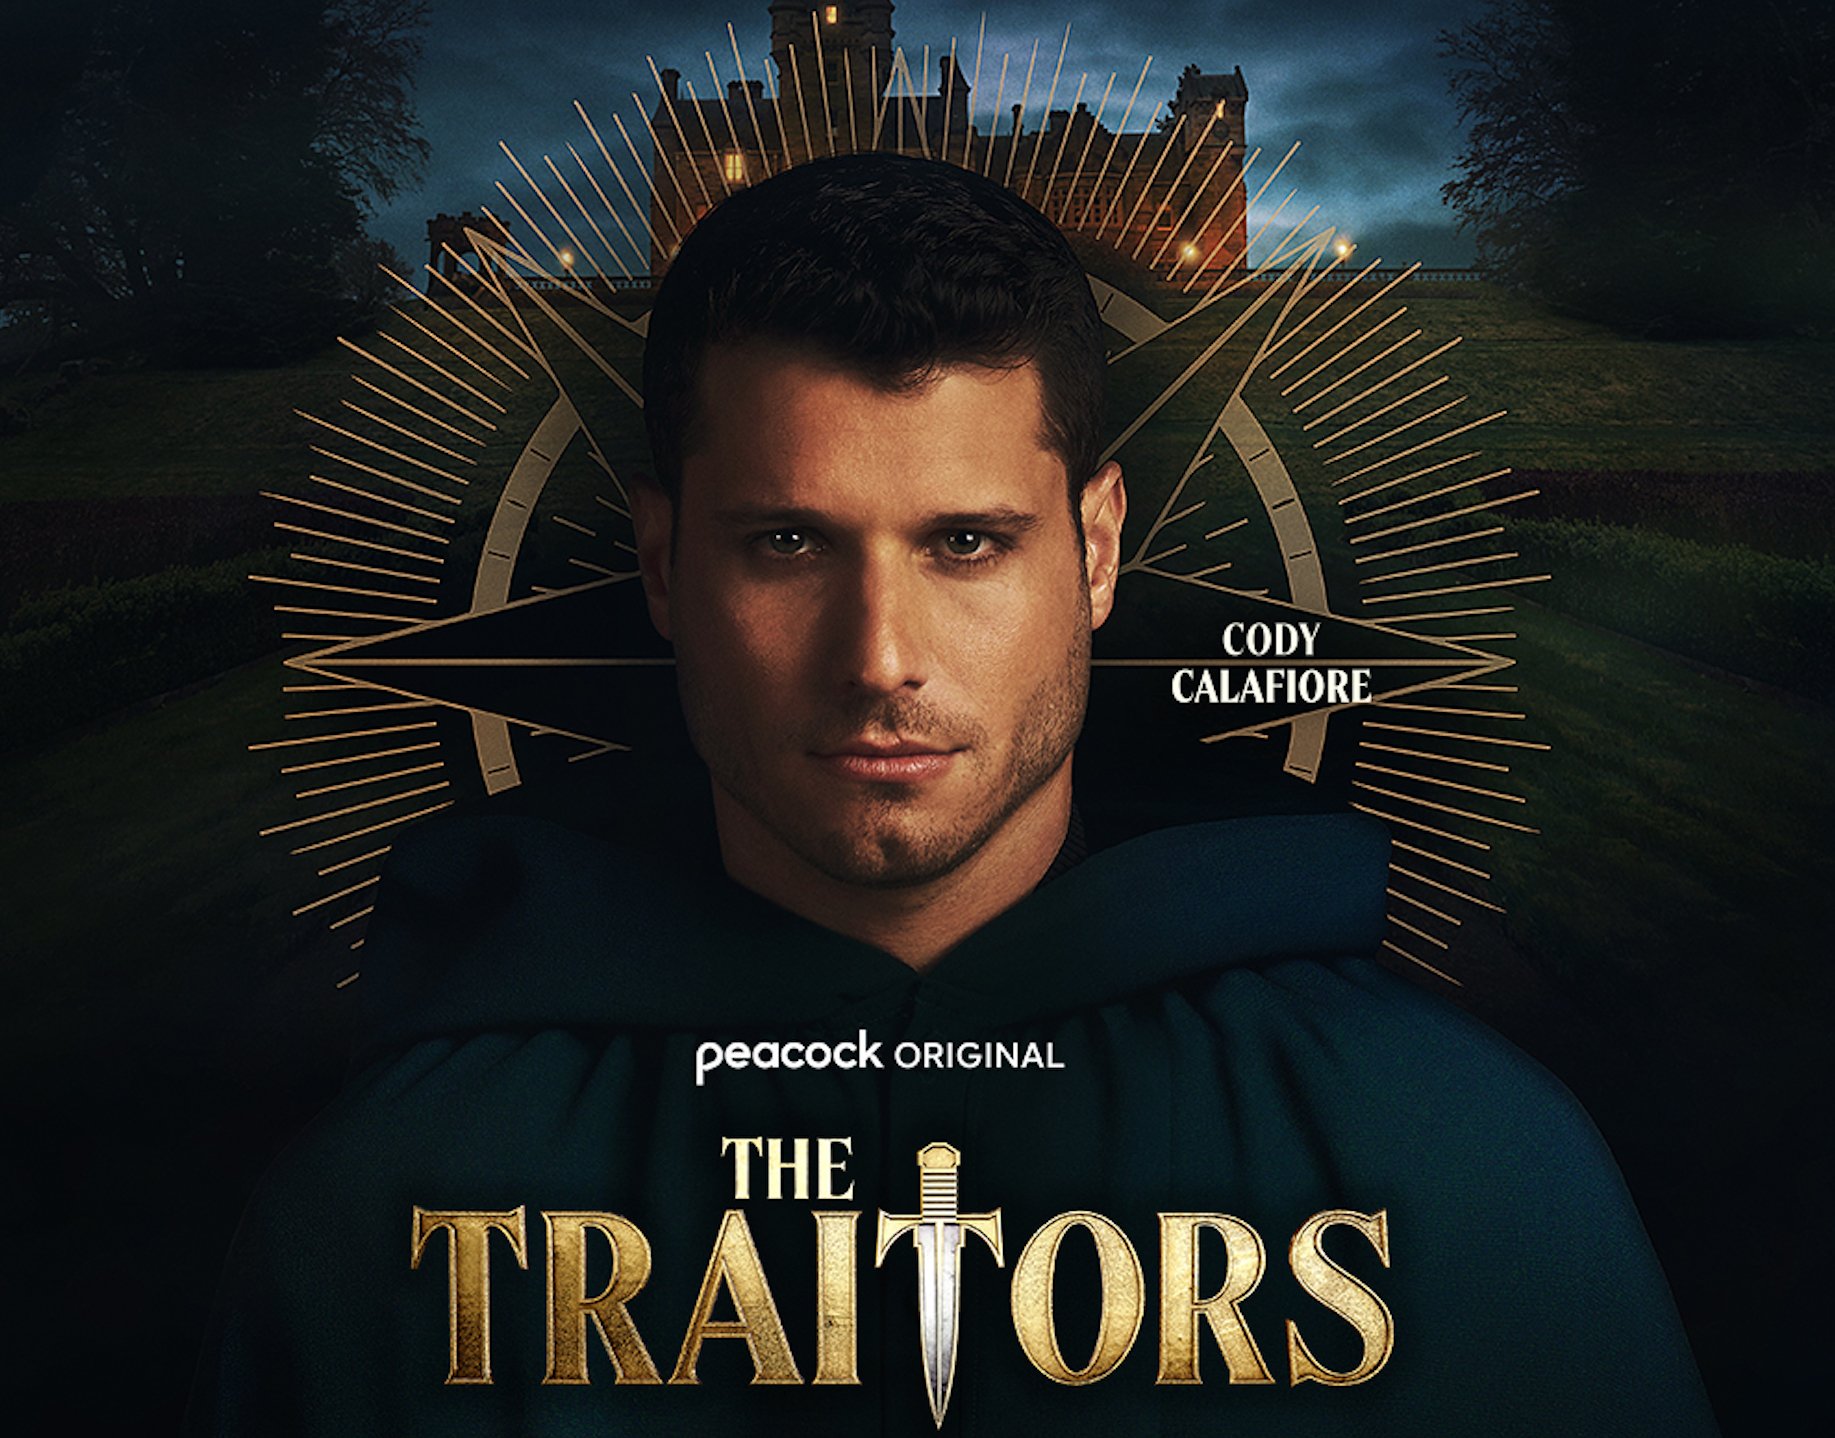 Why ‘The Traitors’ Might Come Down to Cody Calafiore Versus Rachel Reilly of ‘Big Brother’